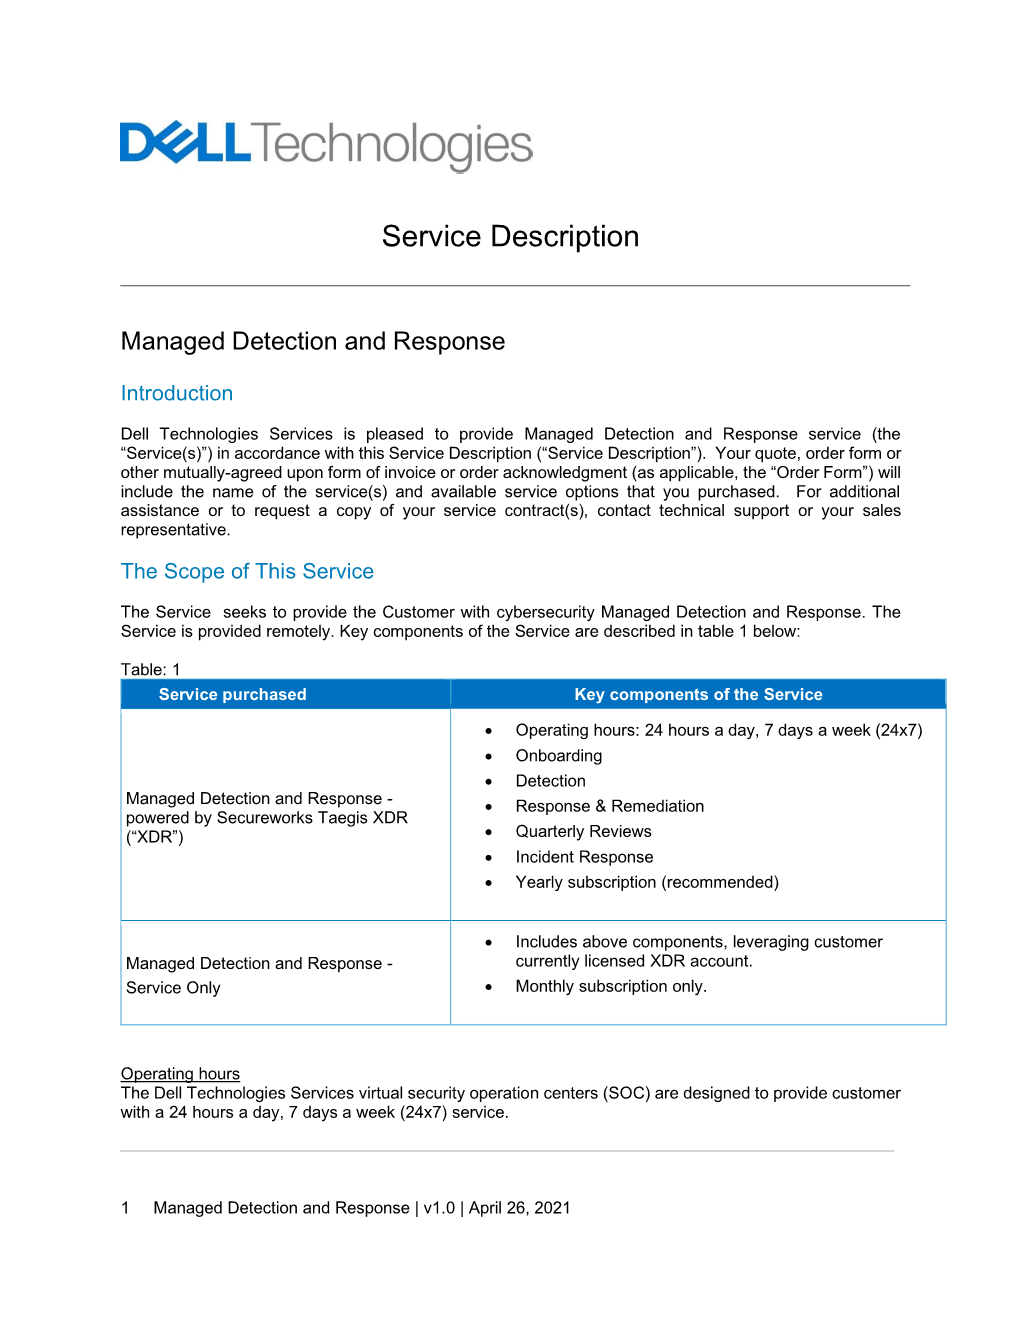 Managed Detection and Response Service (The “Service(S)”) in Accordance with This Service Description (“Service Description”)